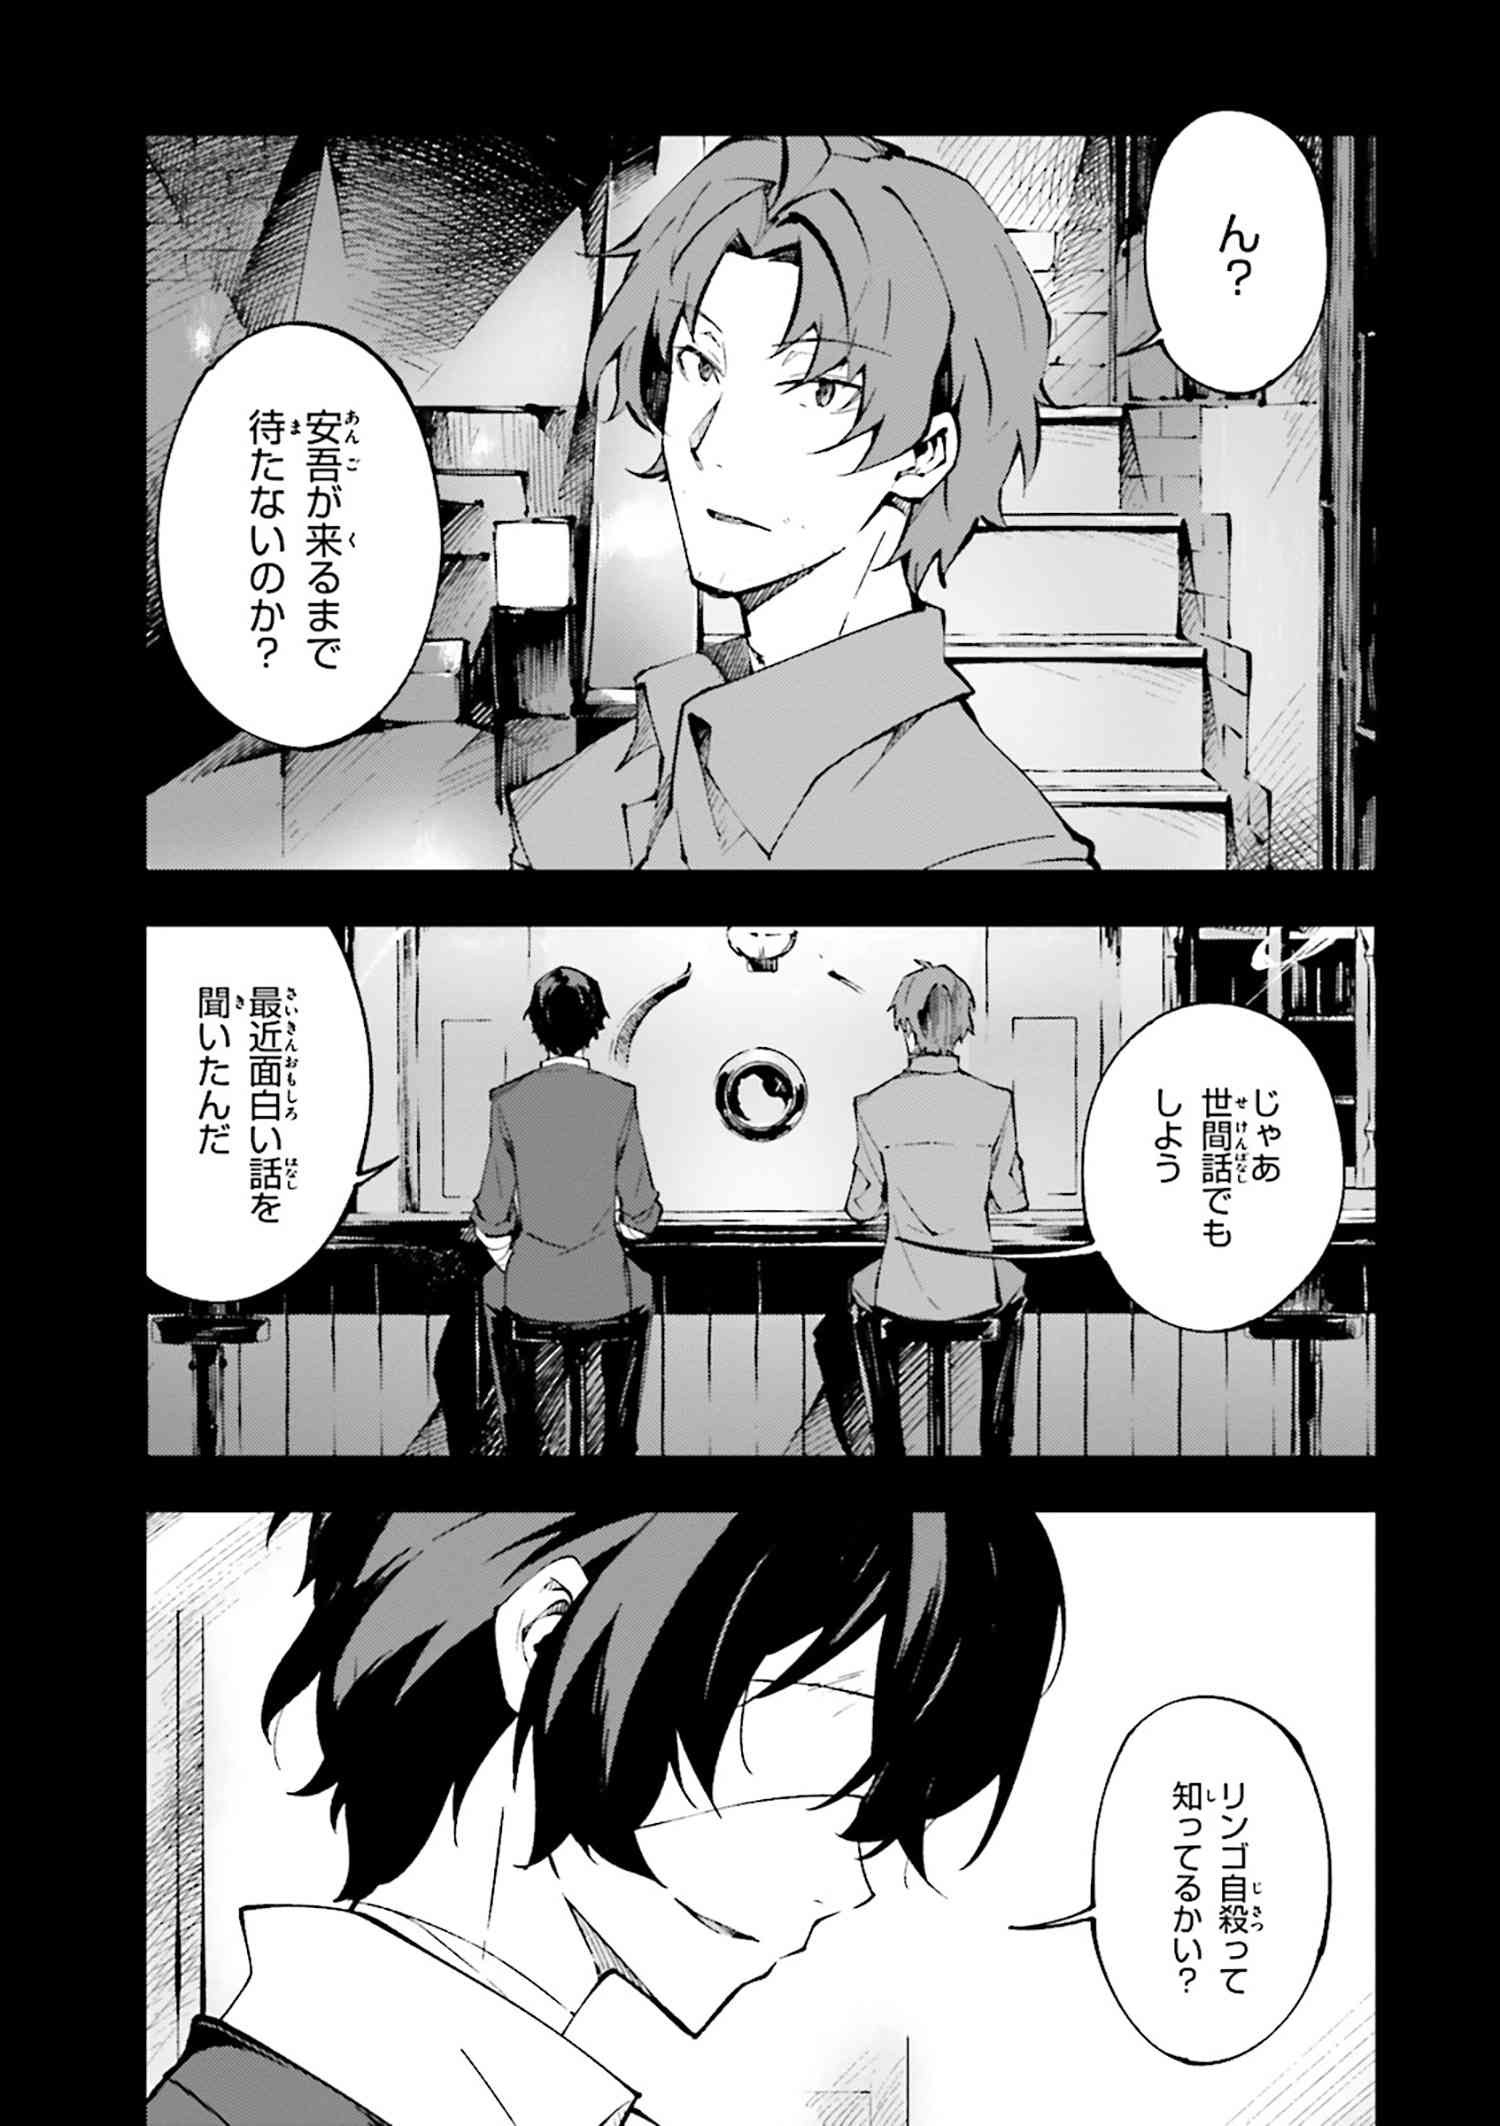 Bungou Stray Dogs: Dead Apple - Chapter 1-2 - Page 2